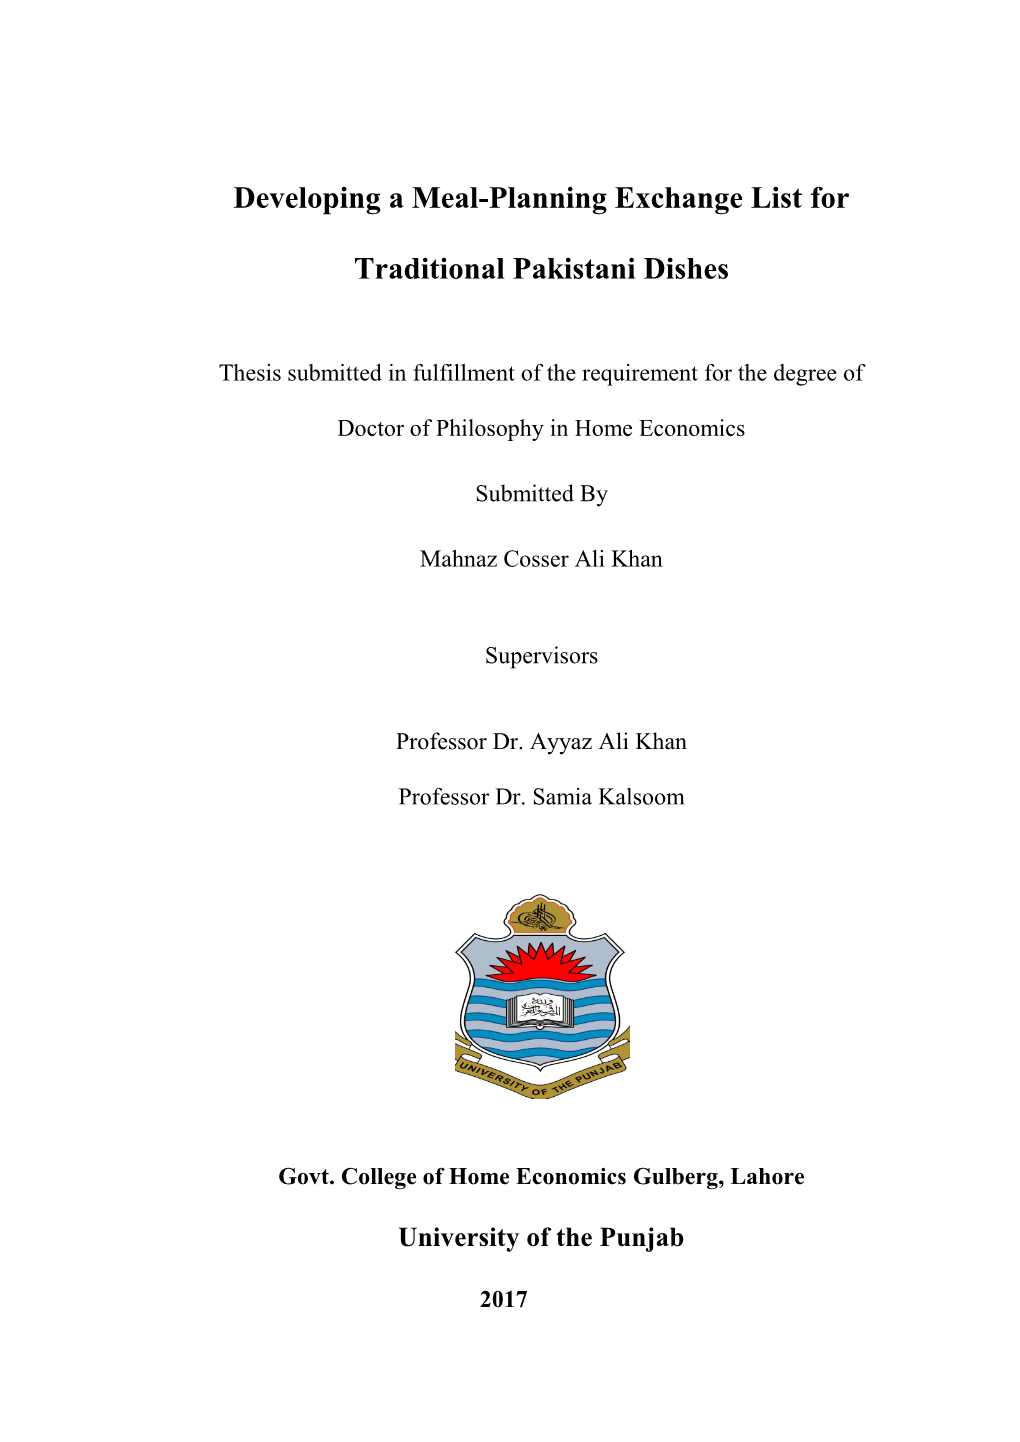 Developing a Meal-Planning Exchange List for Traditional Pakistani Dishes